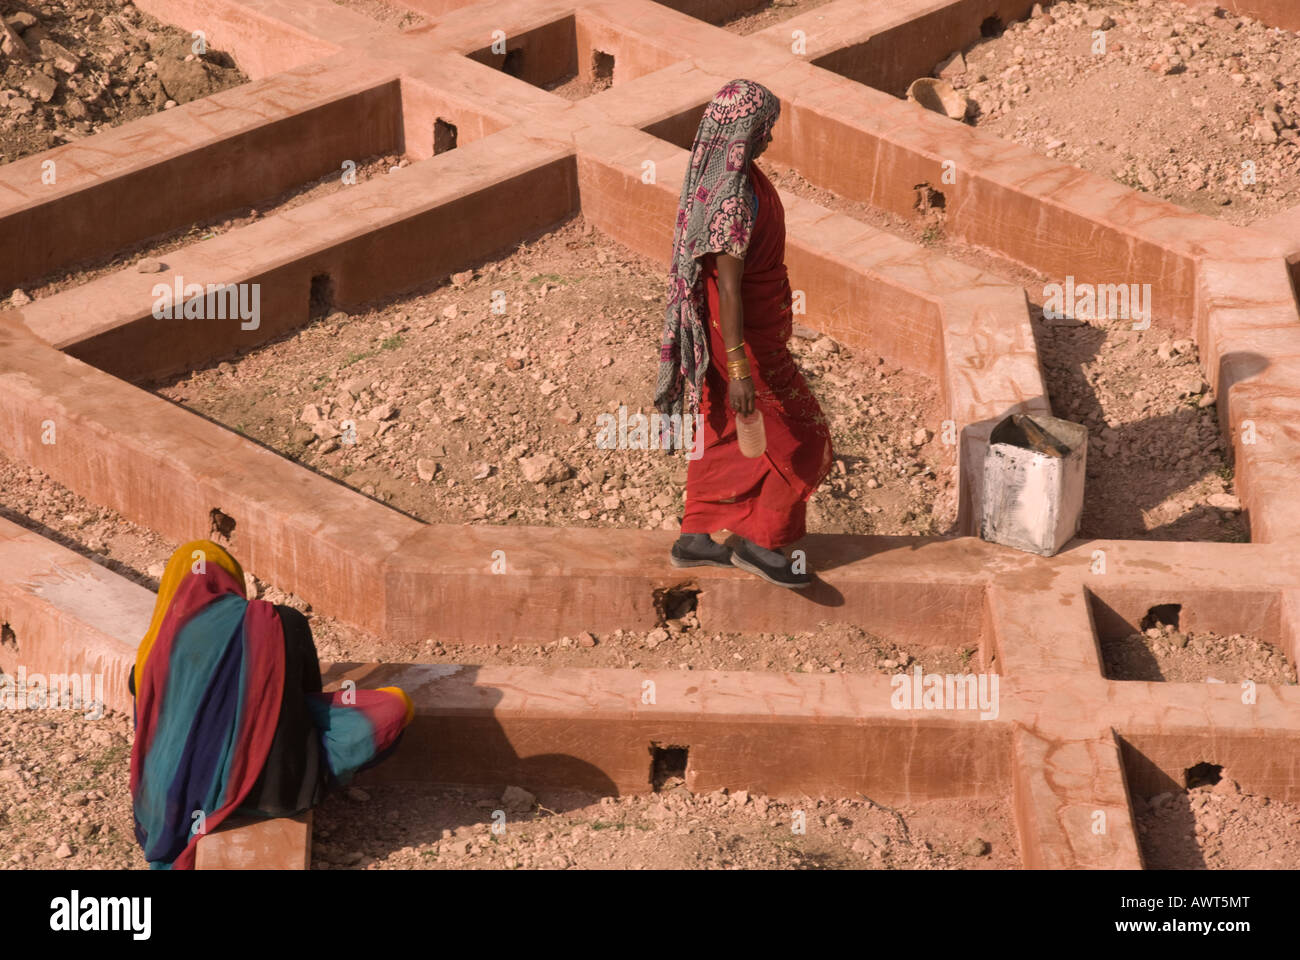 Two women working on a geometric construction project in Jaipur, India dressed in colorful saris. Stock Photo